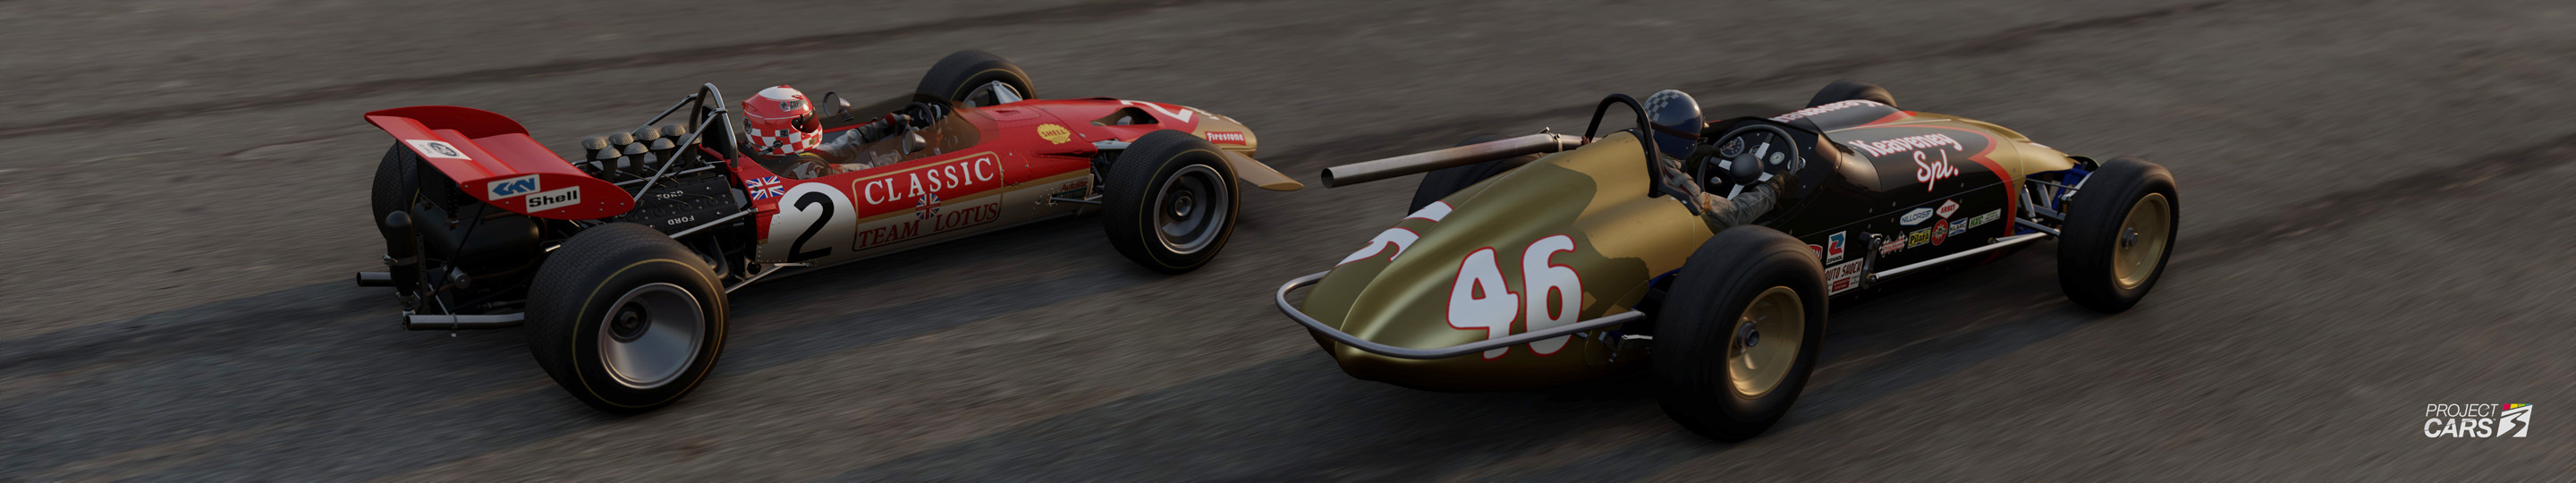 1 PROJECT CARS 3 LOTUS 49C at SILVERSTONE CLASSIC GP copy.jpg